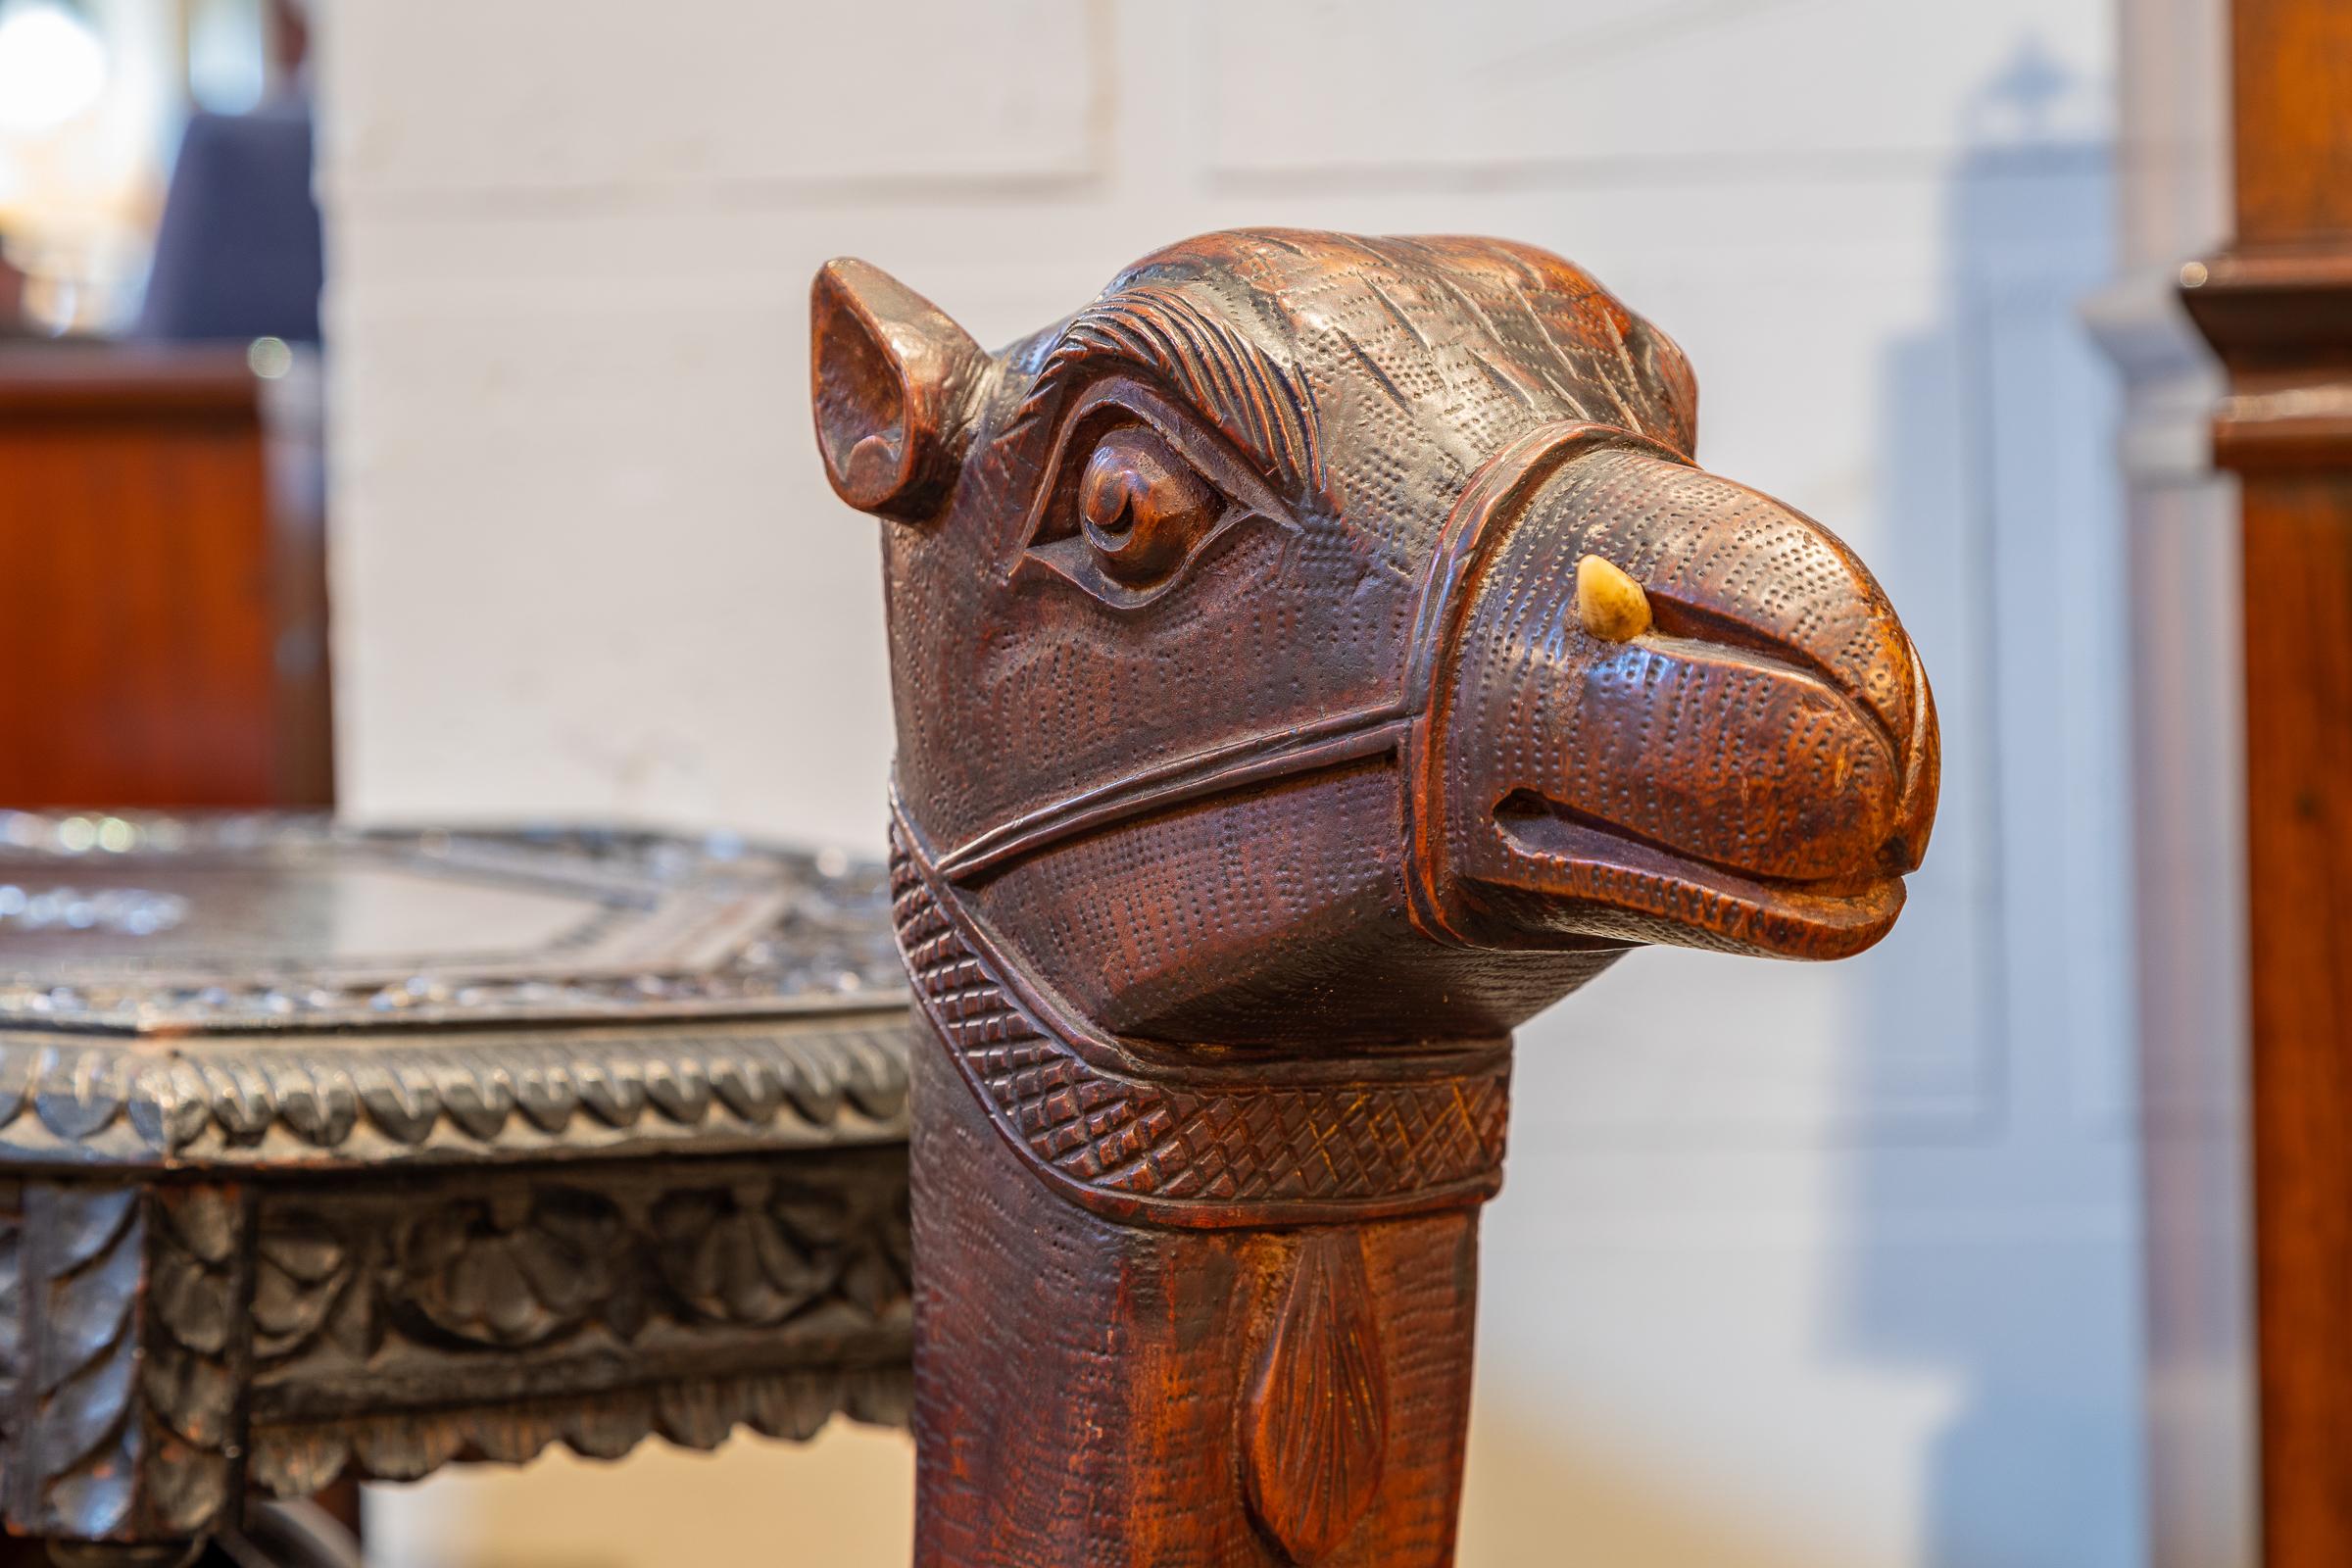 A fine 19th c Anglo Indian carved camel table. Original bone horn in the Camel's nose.